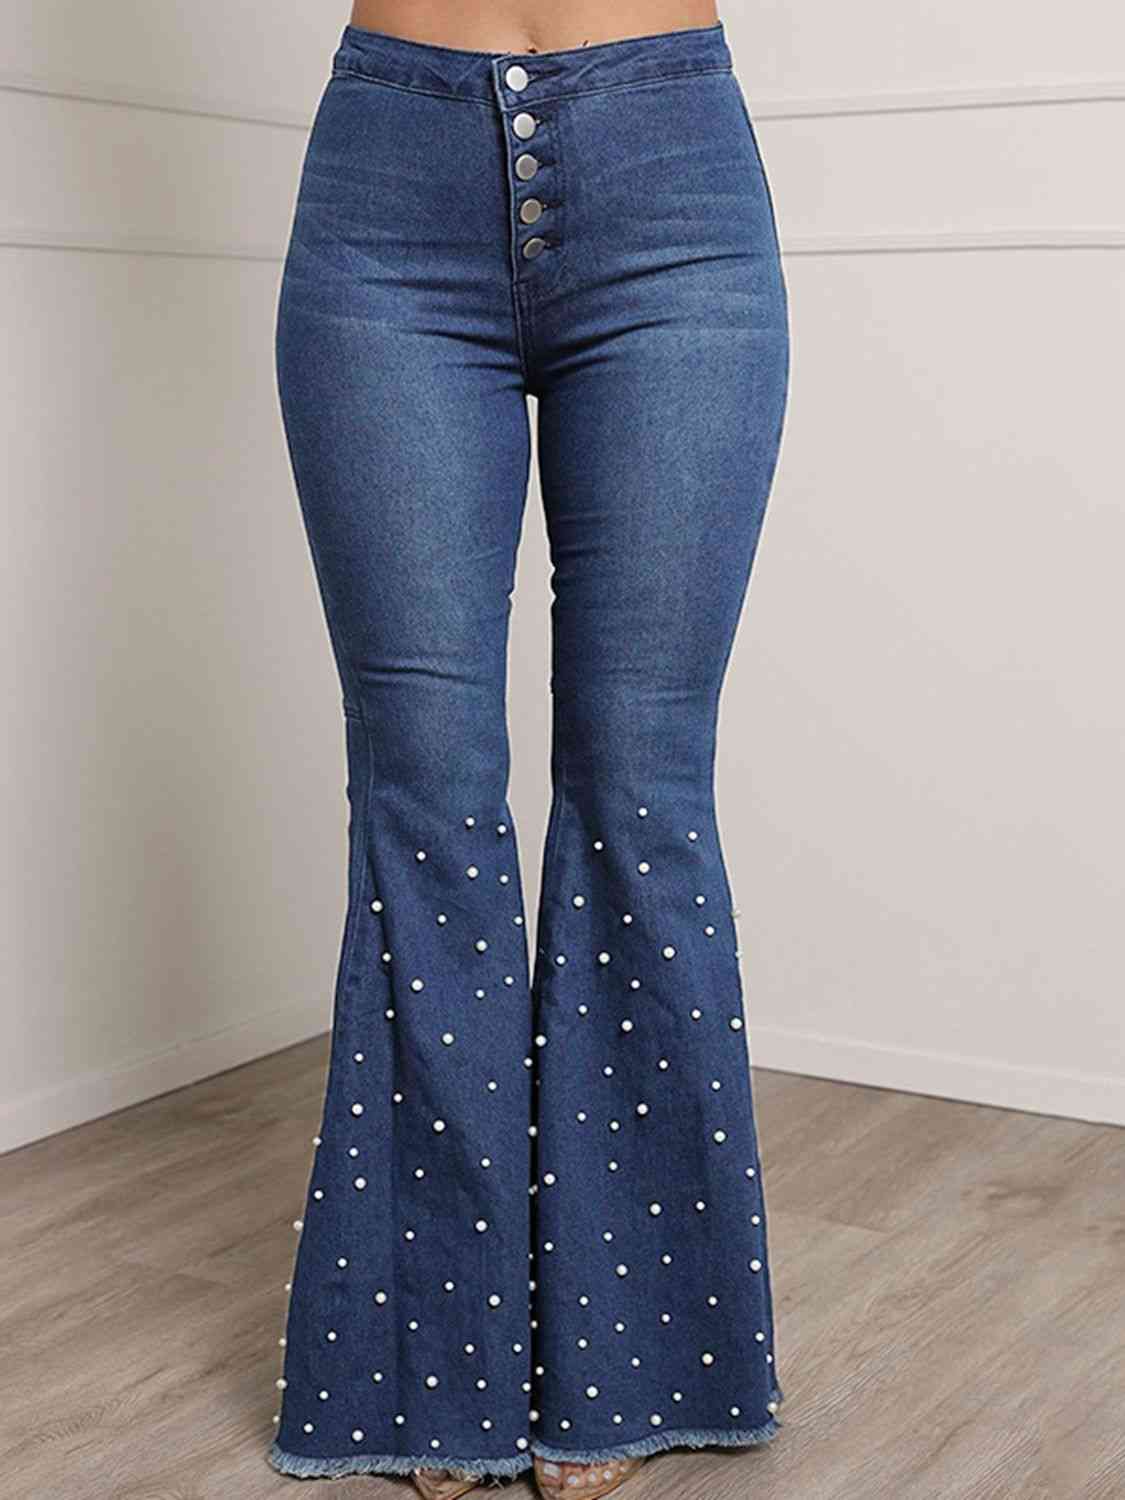 KHD Button Fly Flare Jeans (2 Colors)  Krazy Heart Designs Boutique Medium S 